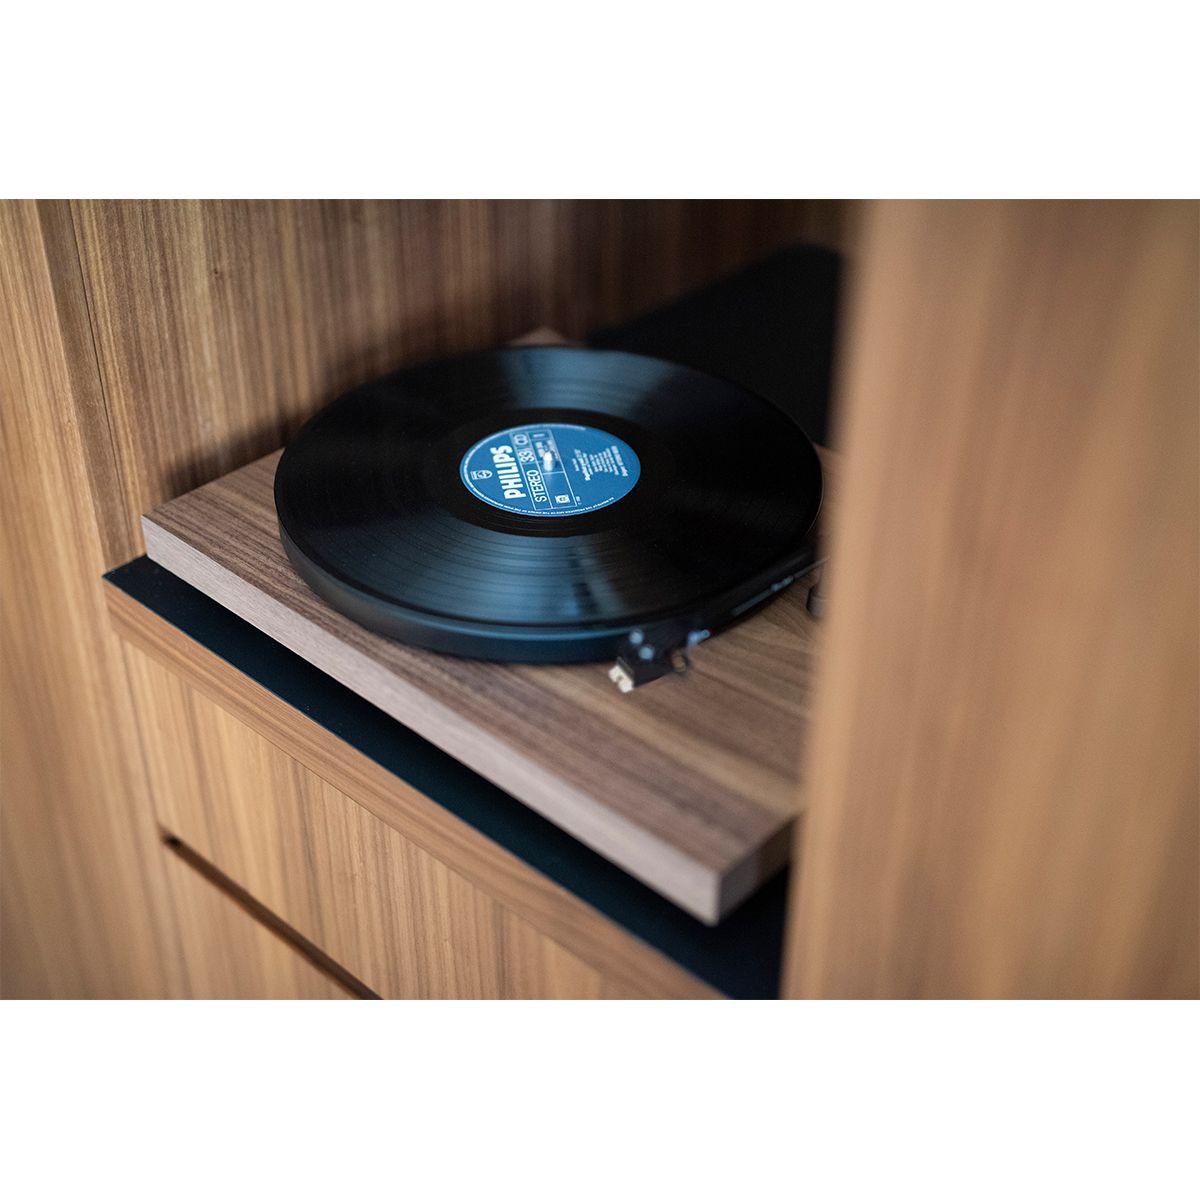 Pro-ject OPEN BOX Debut Carbon Evolution (EVO) Turntable - Satin Walnut - Satisfactory Condition